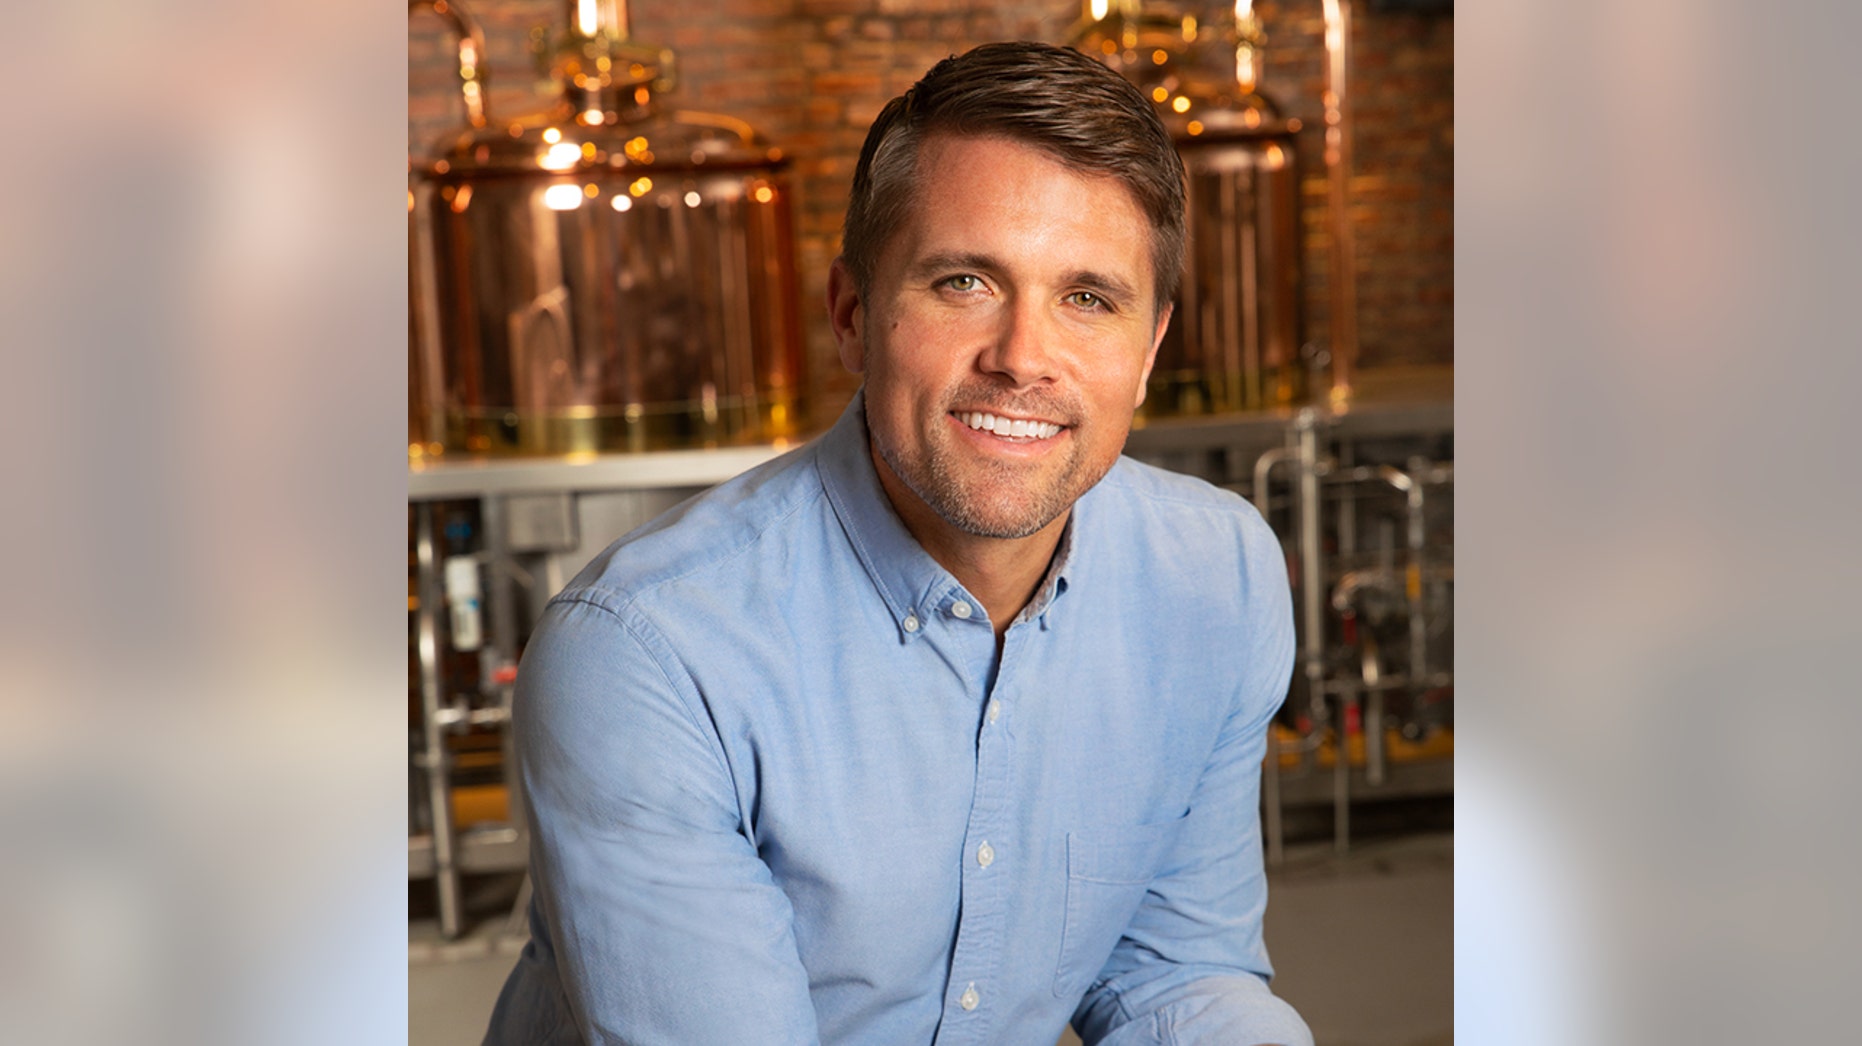 From CIA to beer: Brendan Whitworth's path to CEO of Anheuser-Busch